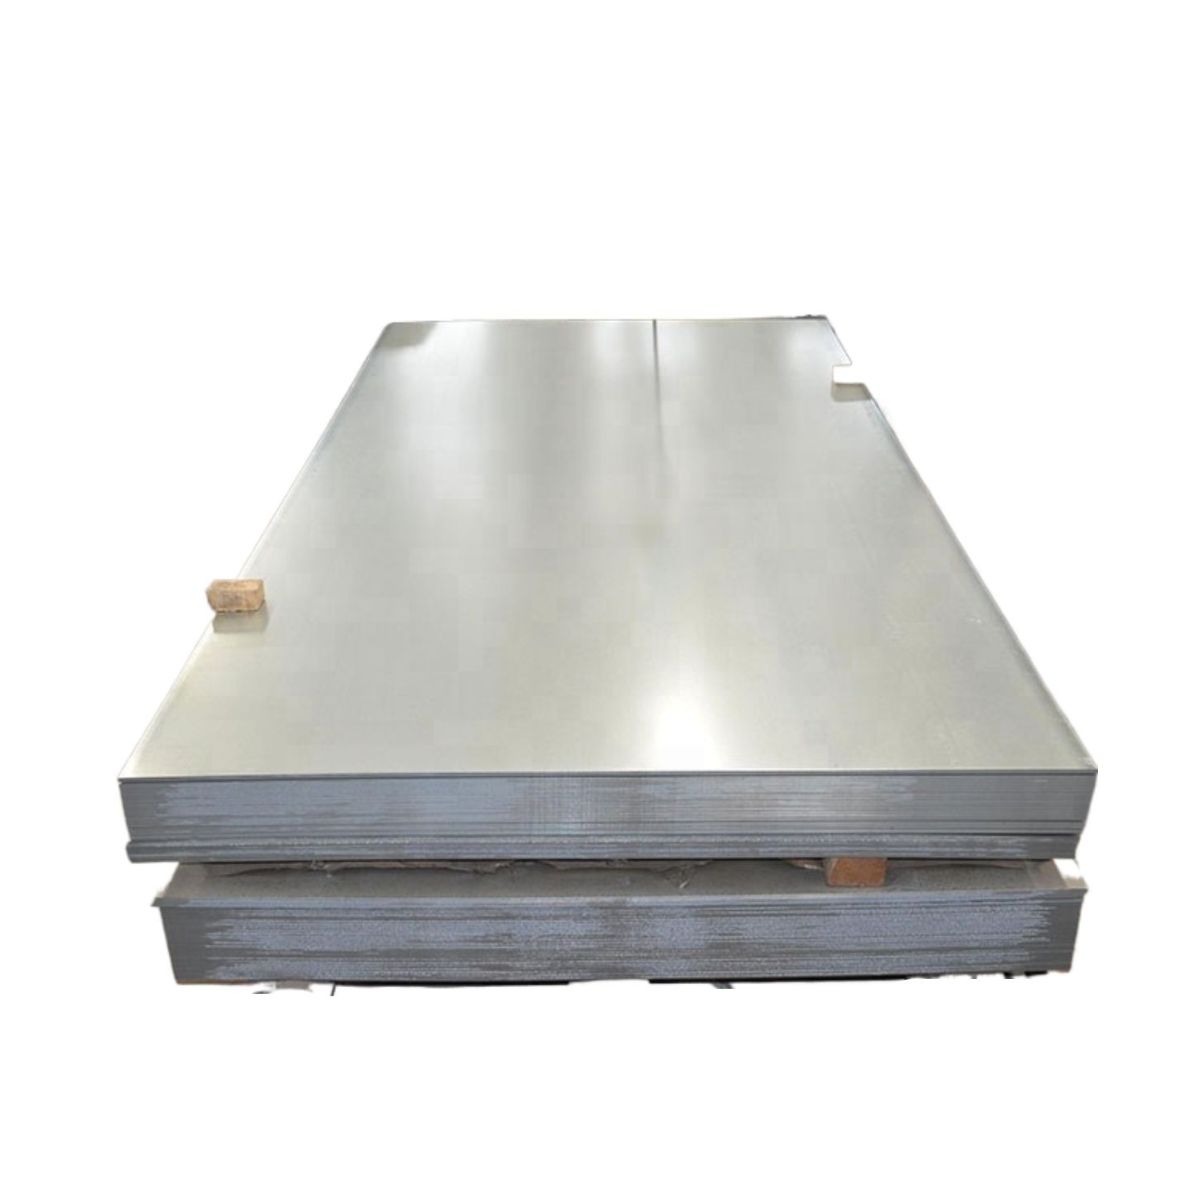 Factory Price ASTM A36 Steel Plate 4x8ft Galvanized Steel Sheet Galvanized Steel Sheets